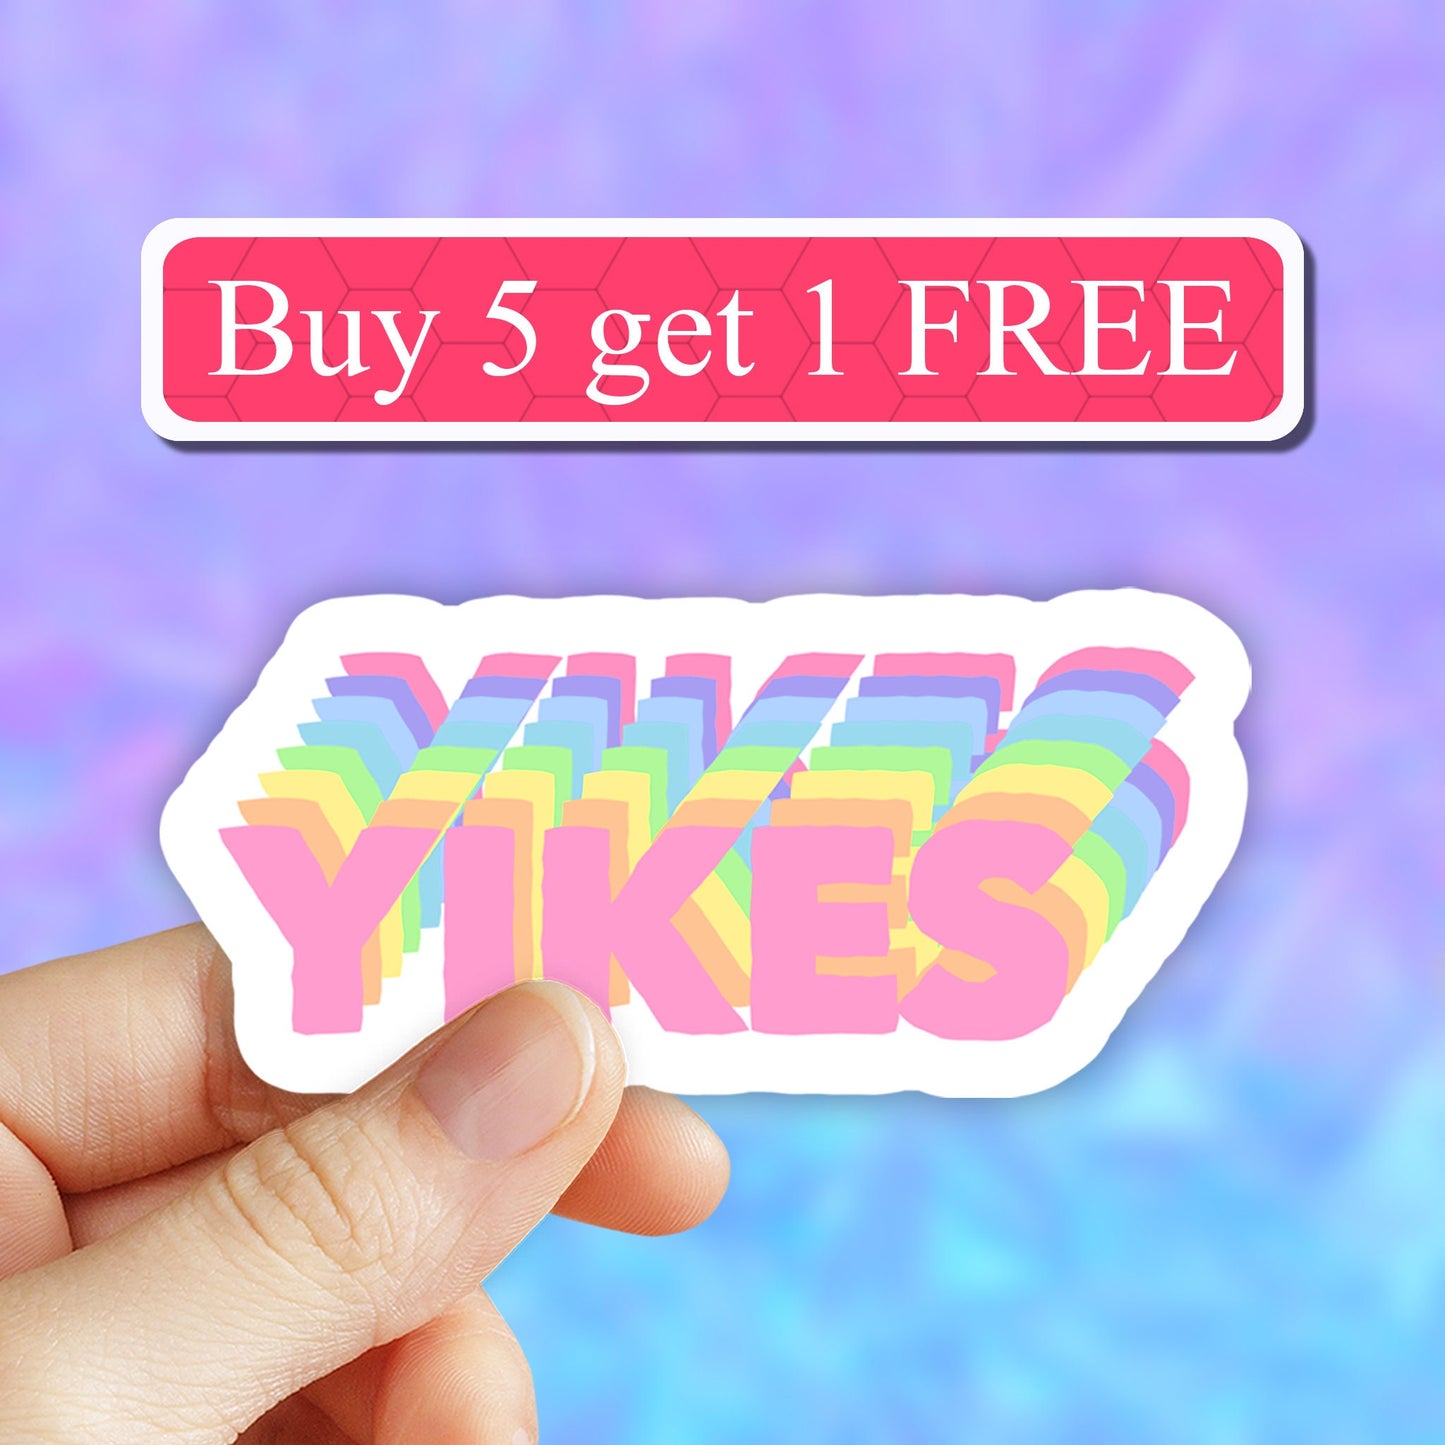 Yikes Sticker, Water bottle Stickers, VSCO Stickers , Laptop Decal, Aesthetic Stickers, Computer Stickers, Vinyl Stickers, waterproof